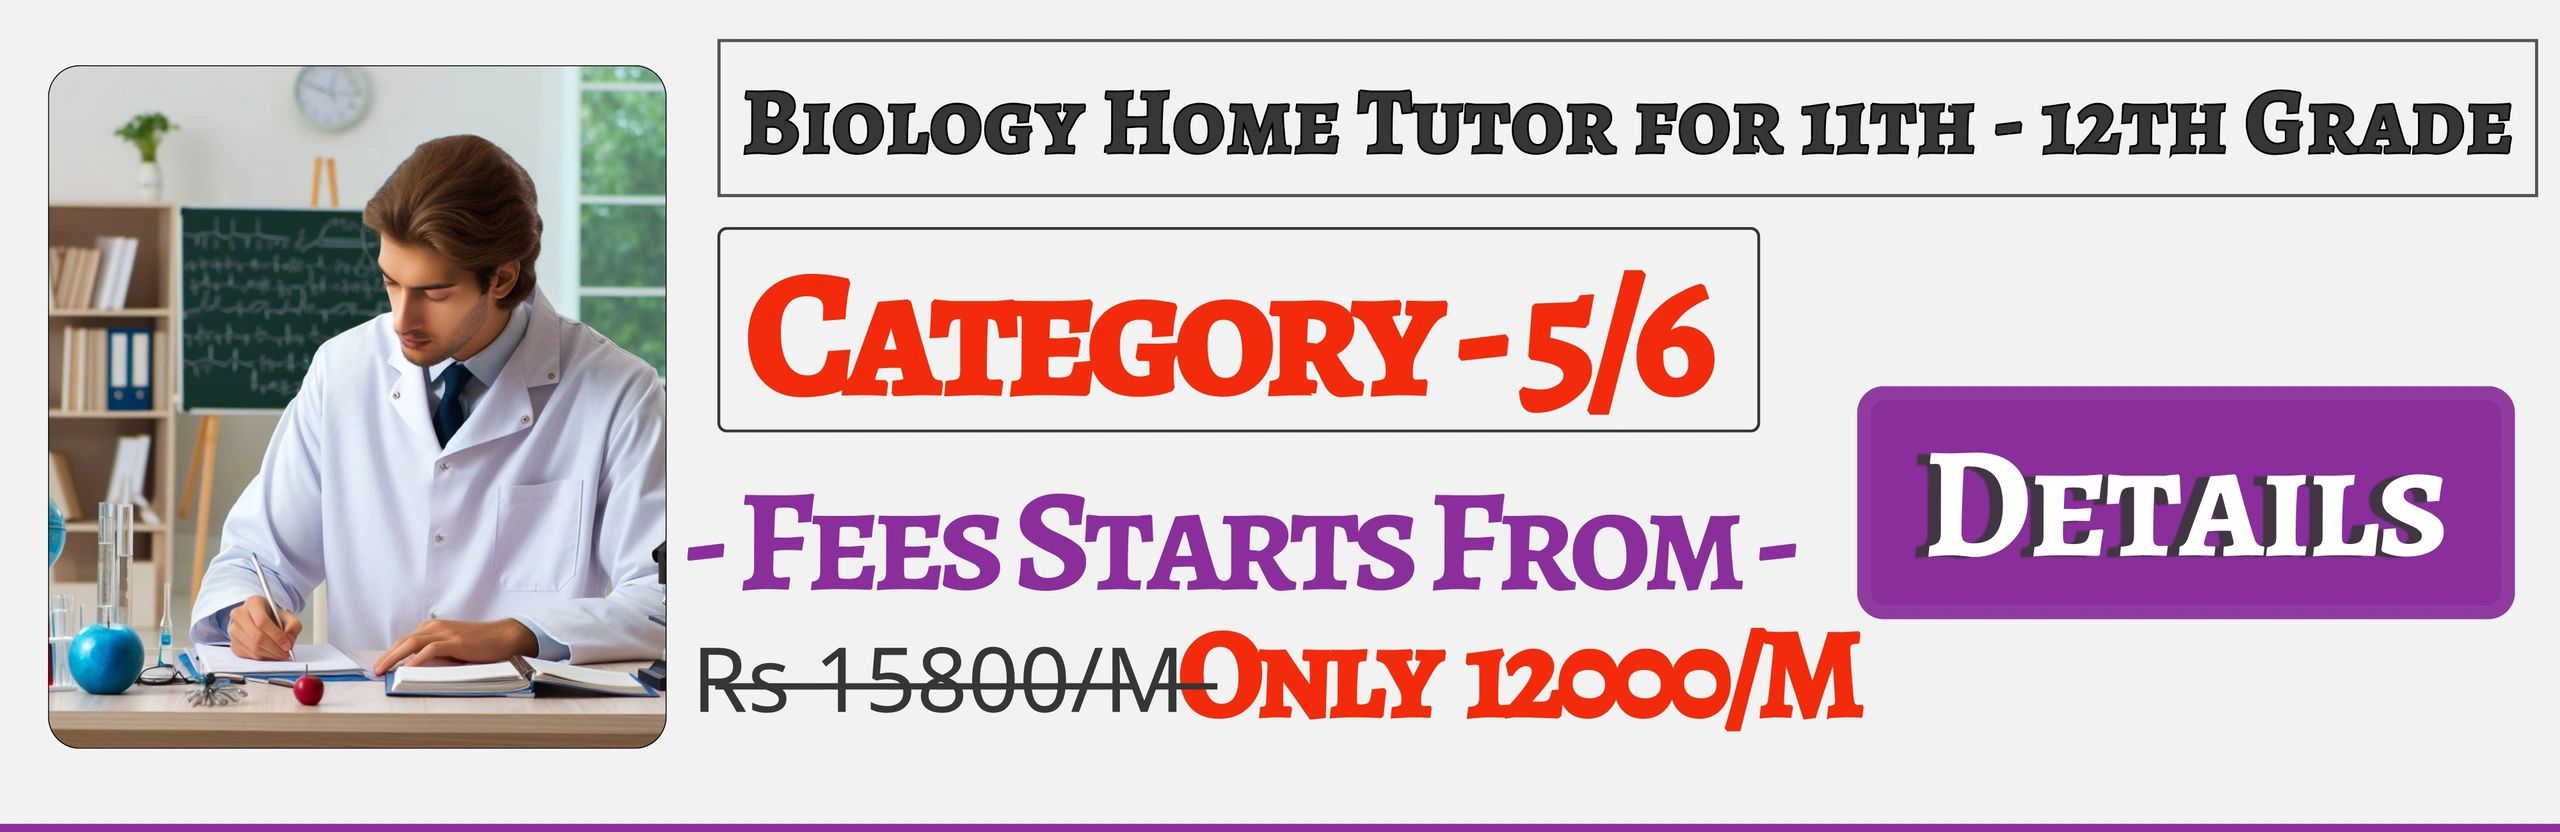 Book Best Nearby Biology Home Tuition Tutors For 11th & 12th In Jaipur , Fees Only 12000/M